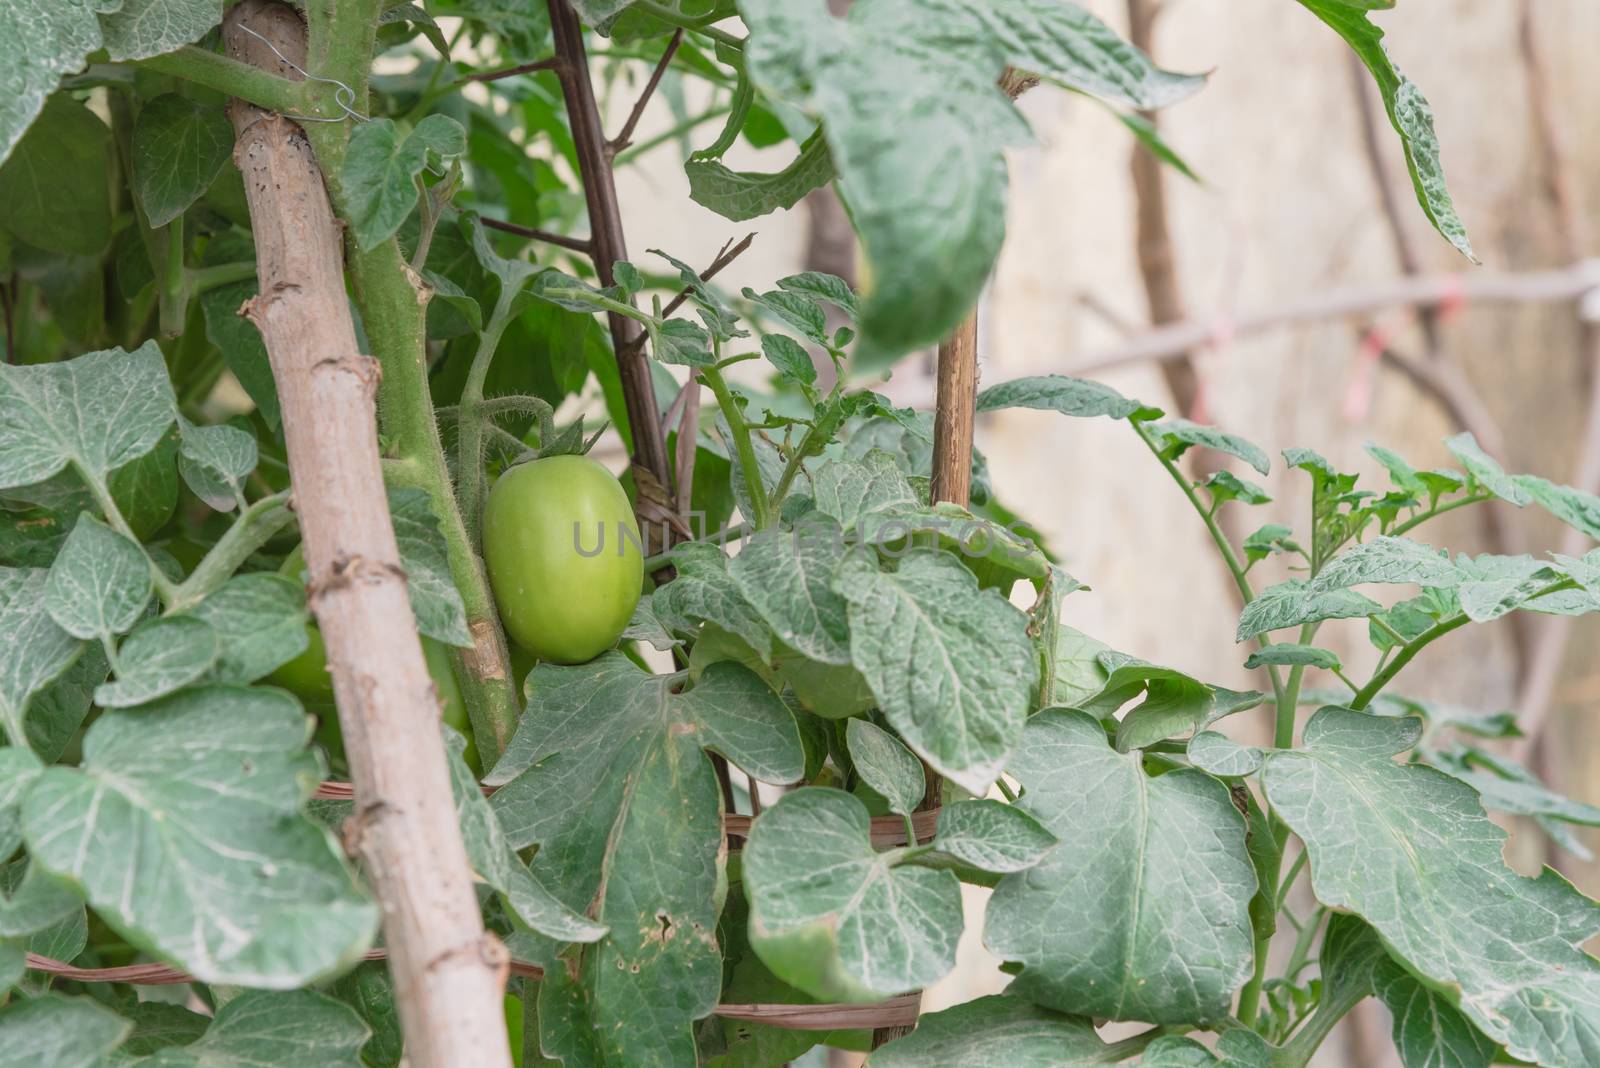 Green tomatoes growing on homemade tree branches trellis structure at container garden in Hanoi by trongnguyen